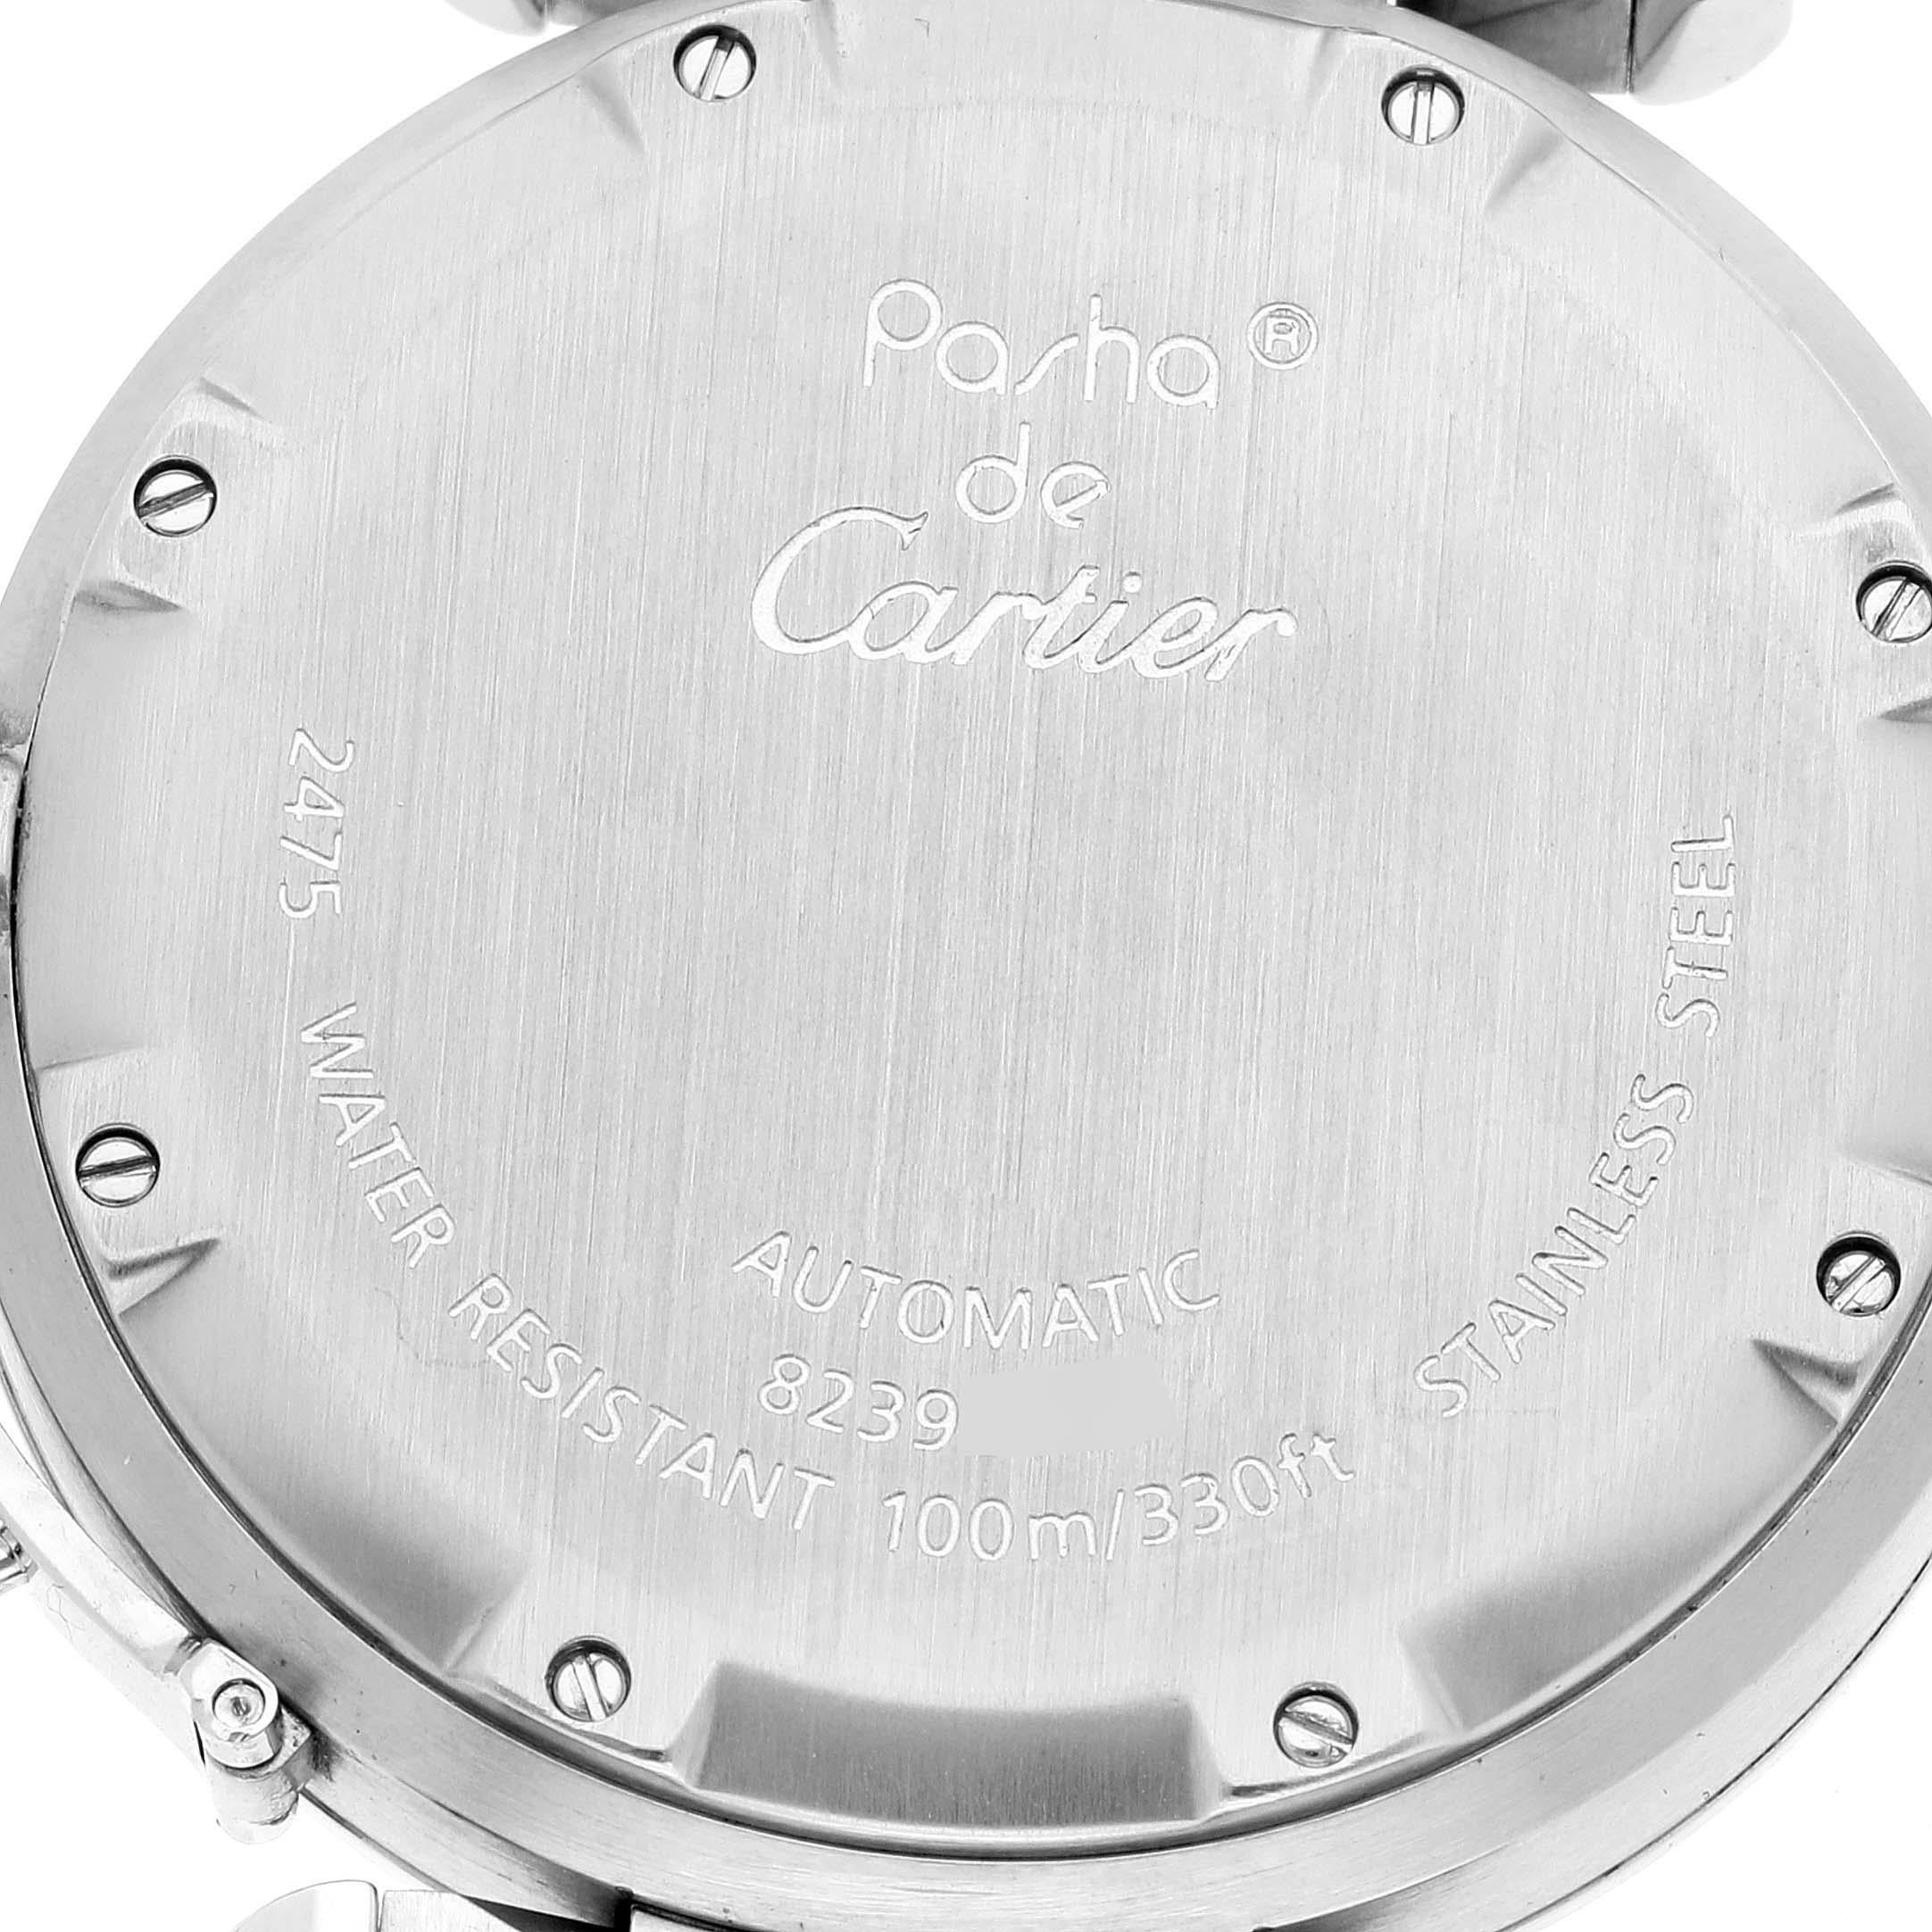 Cartier Pasha Big Date Pink Dial Steel Ladies Watch W31058M7 Box Papers 1